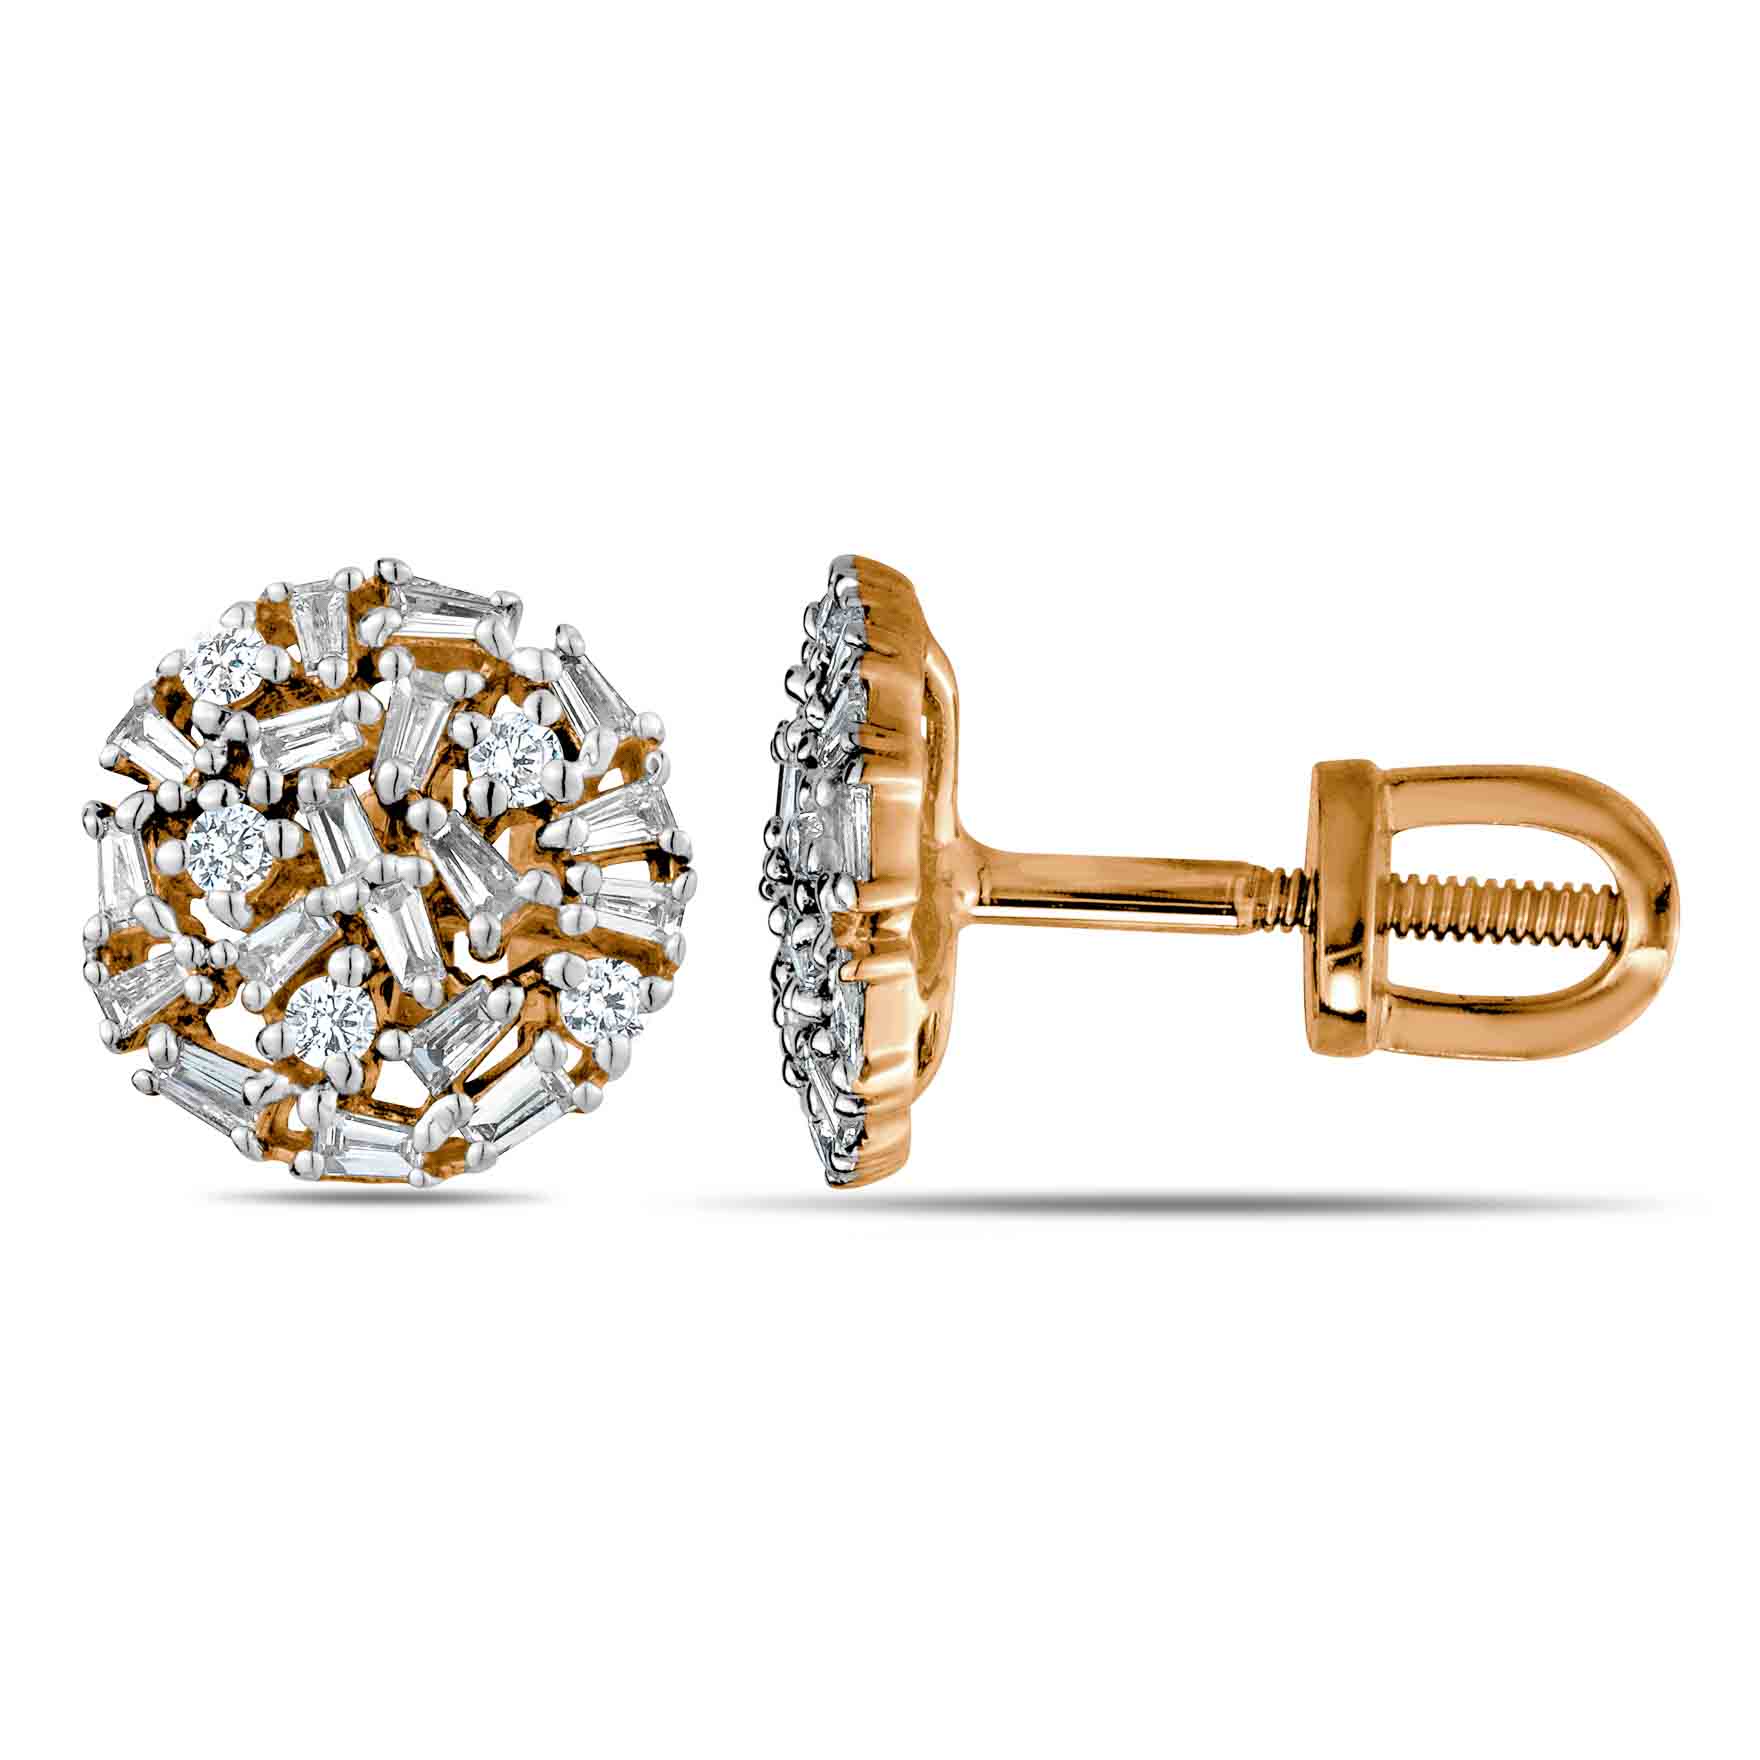 Tapered Baguette and Round Diamond Stud Earrings. Hypoallergenic